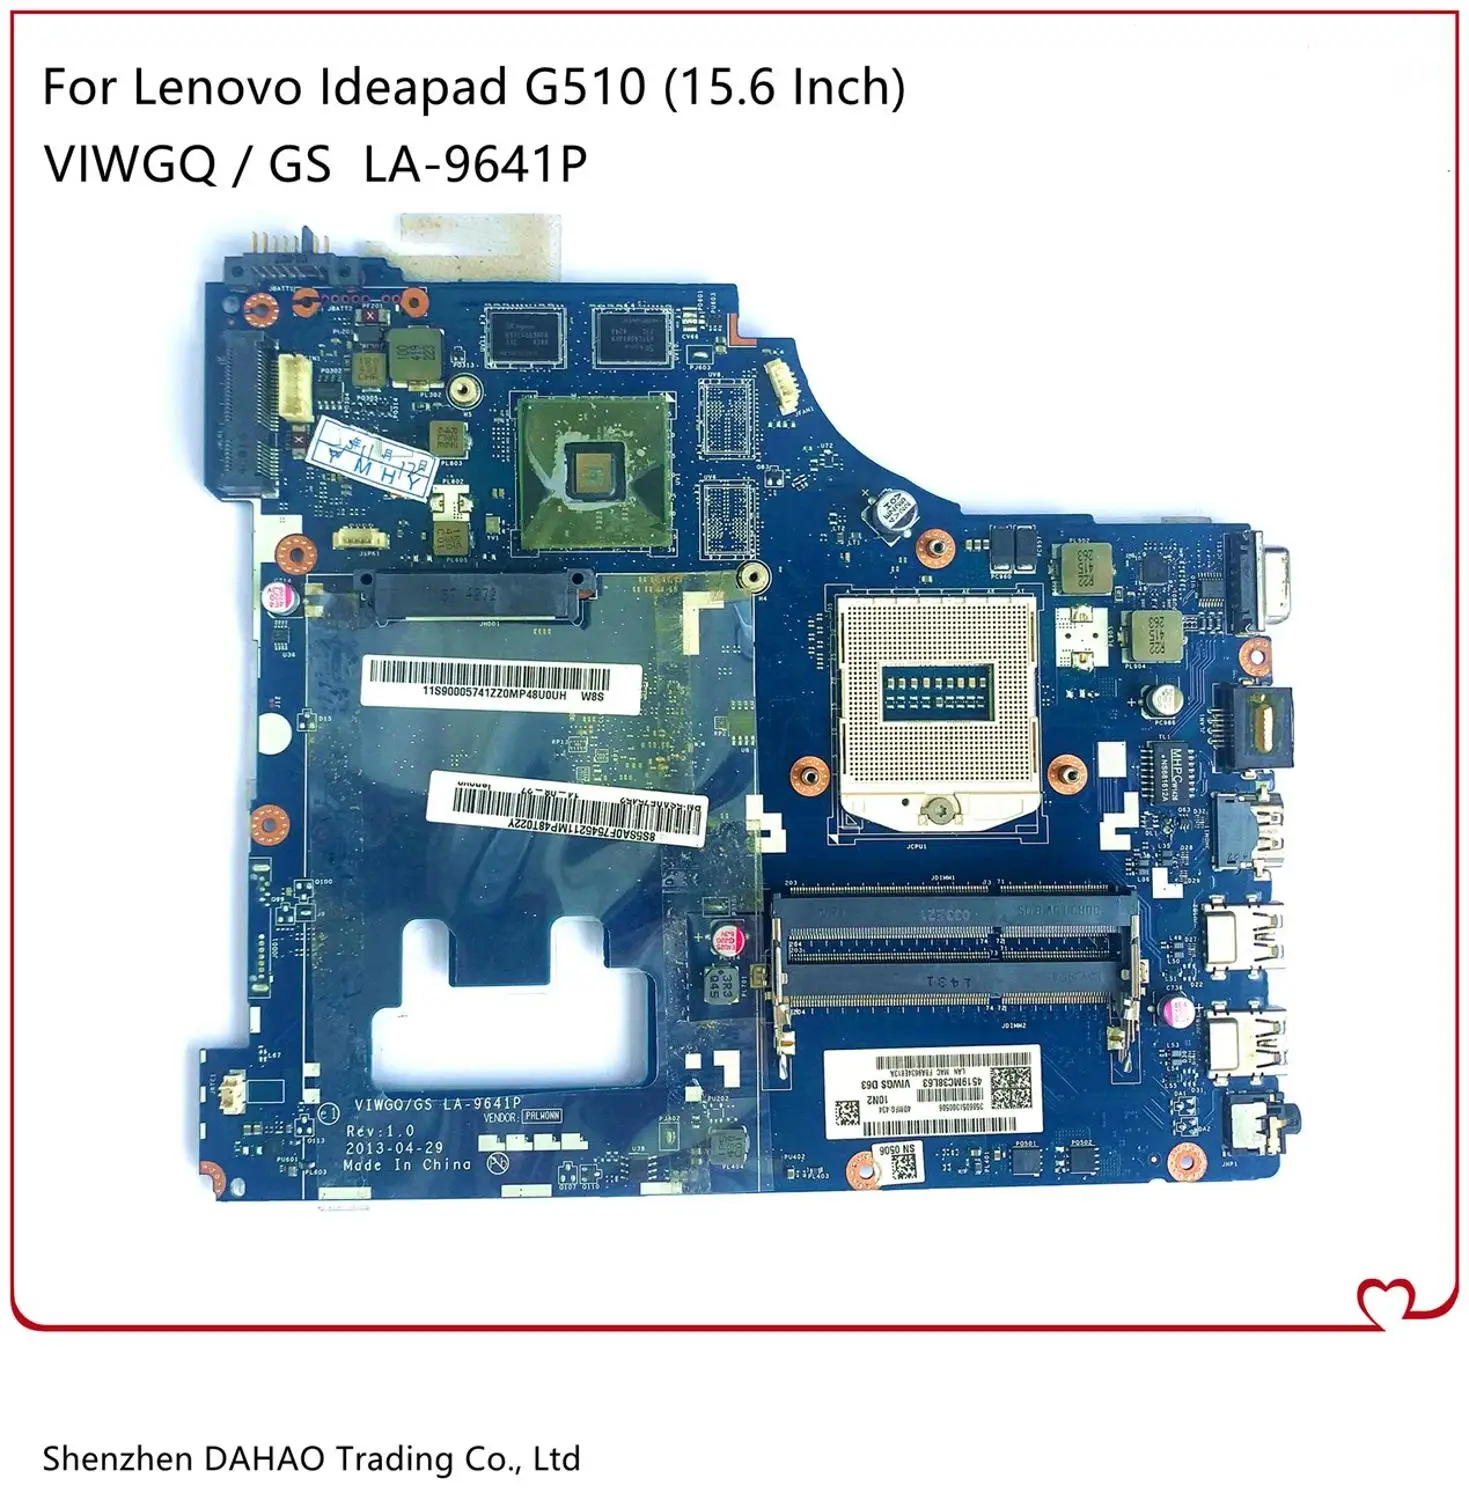 

For Lenovo IdeaPad G510 Laptop Motherboard 15.6" VIWGQ / GS LA-9641P G510 Mainboard With R5 M230 2GB-GPU 100% Fully Tested